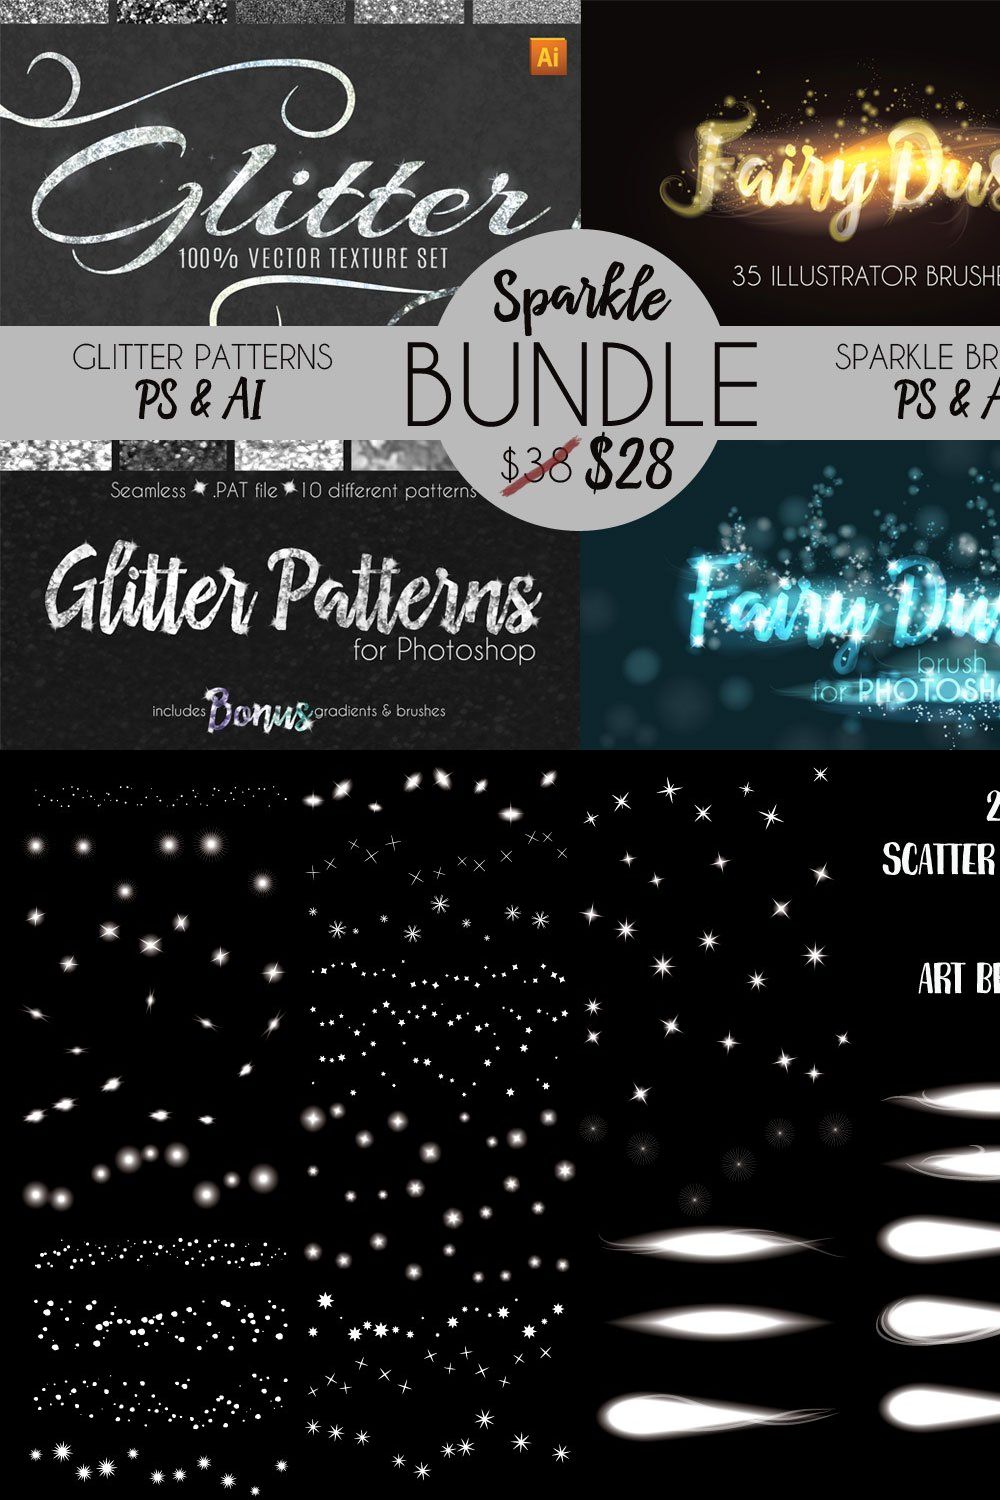 Sparkle and Glitter Bundle pinterest preview image.